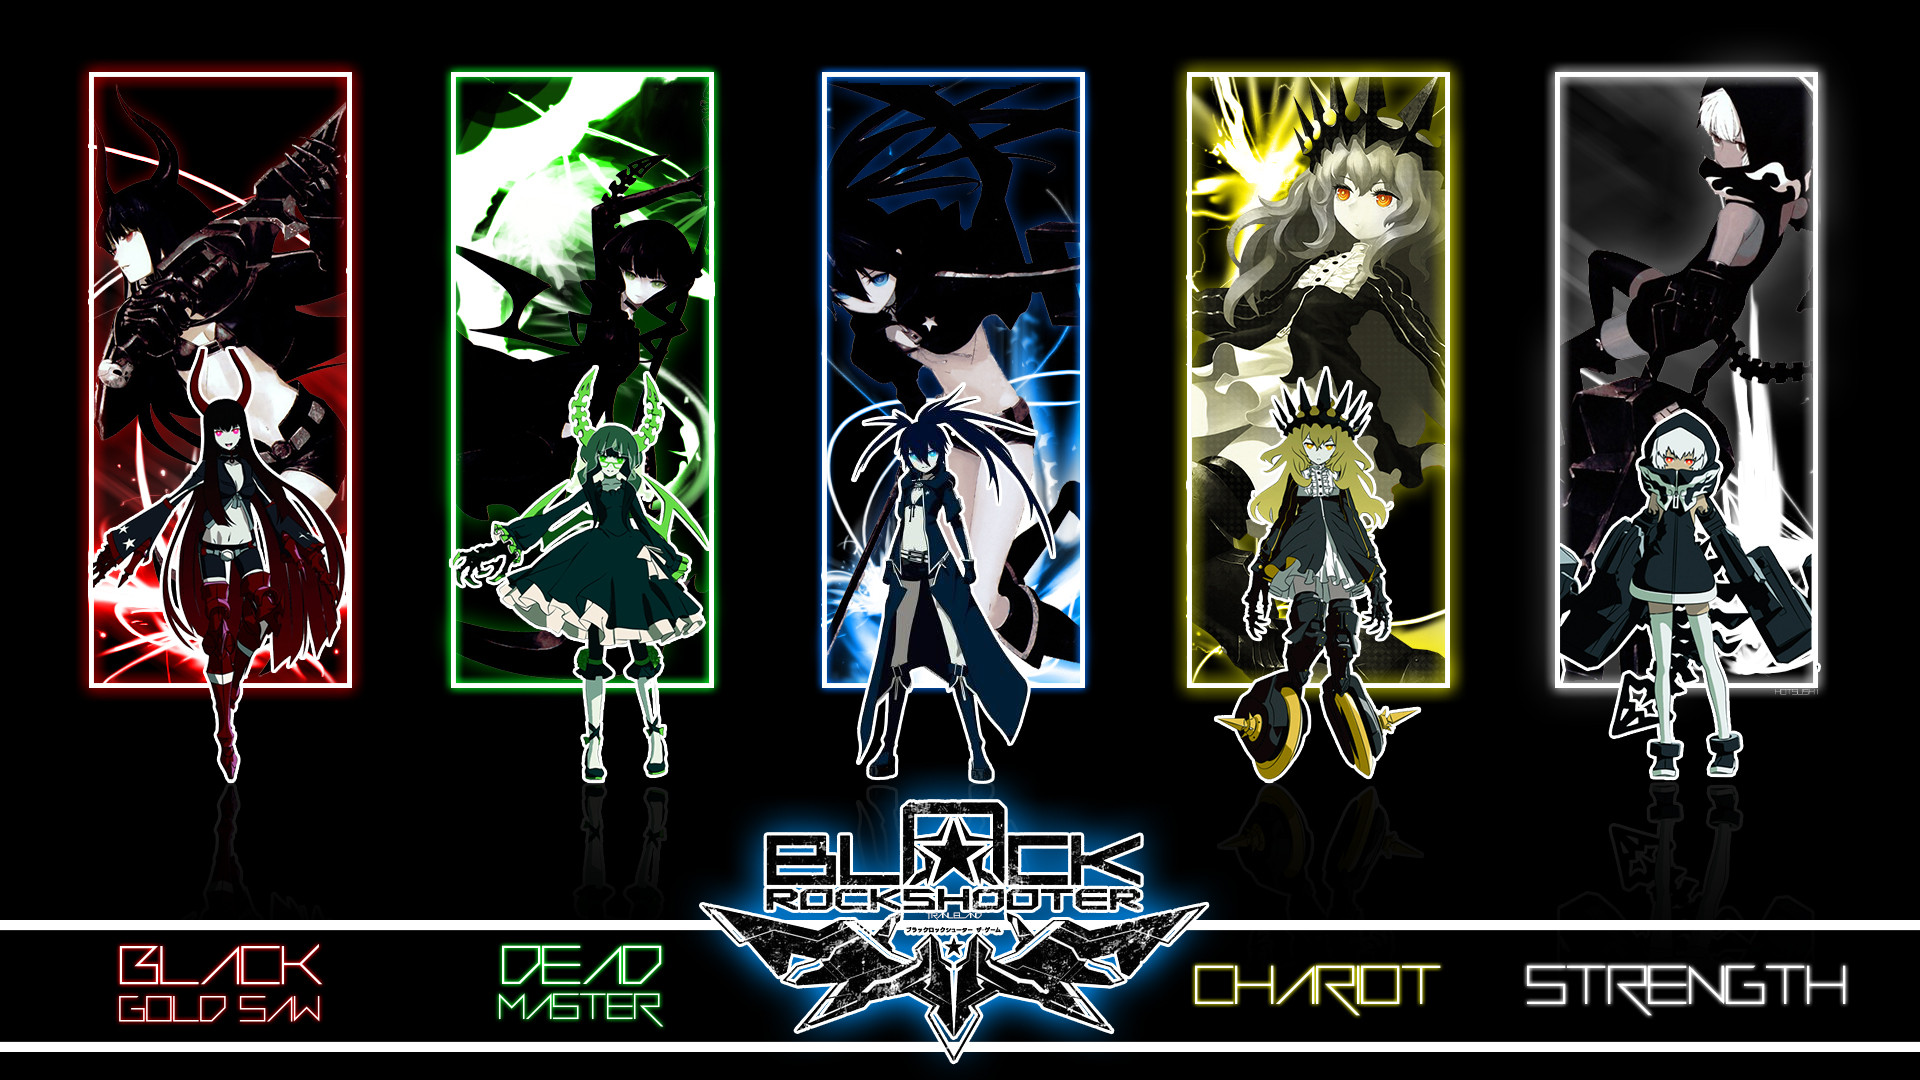 300 Dead Master (Black Rock Shooter) HD Wallpapers | Backgrounds ...